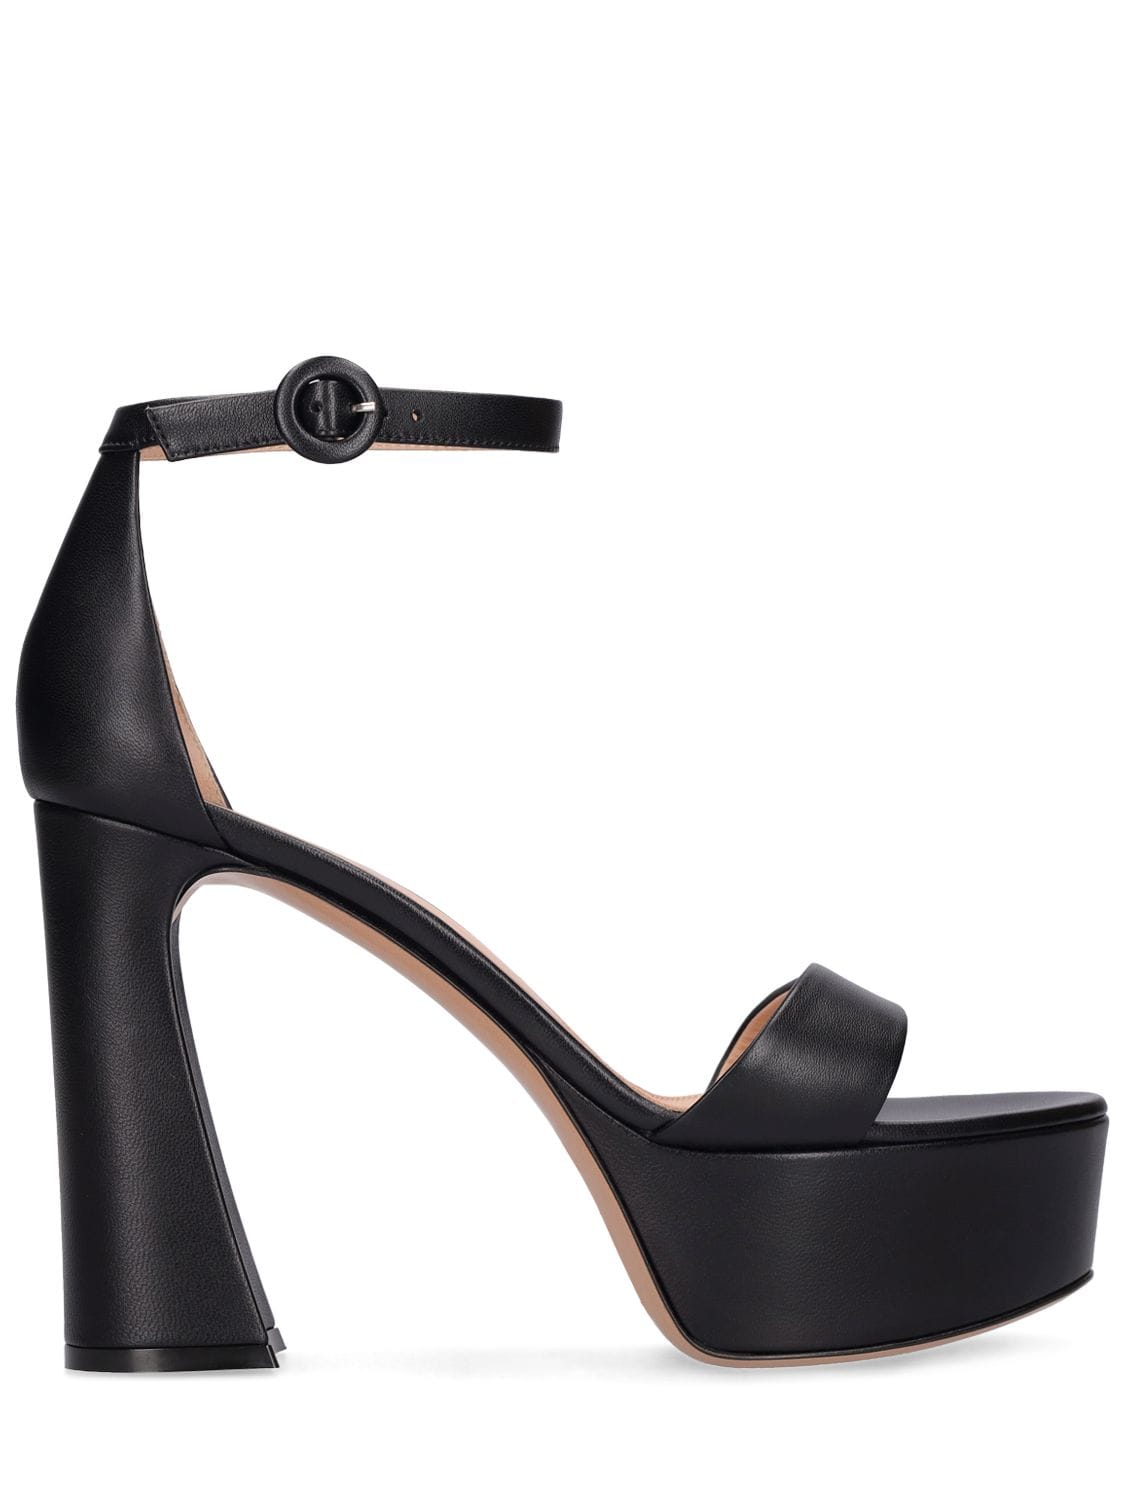 Gianvito Rossi 105mm Holly Leather High Heel Sandals In Black